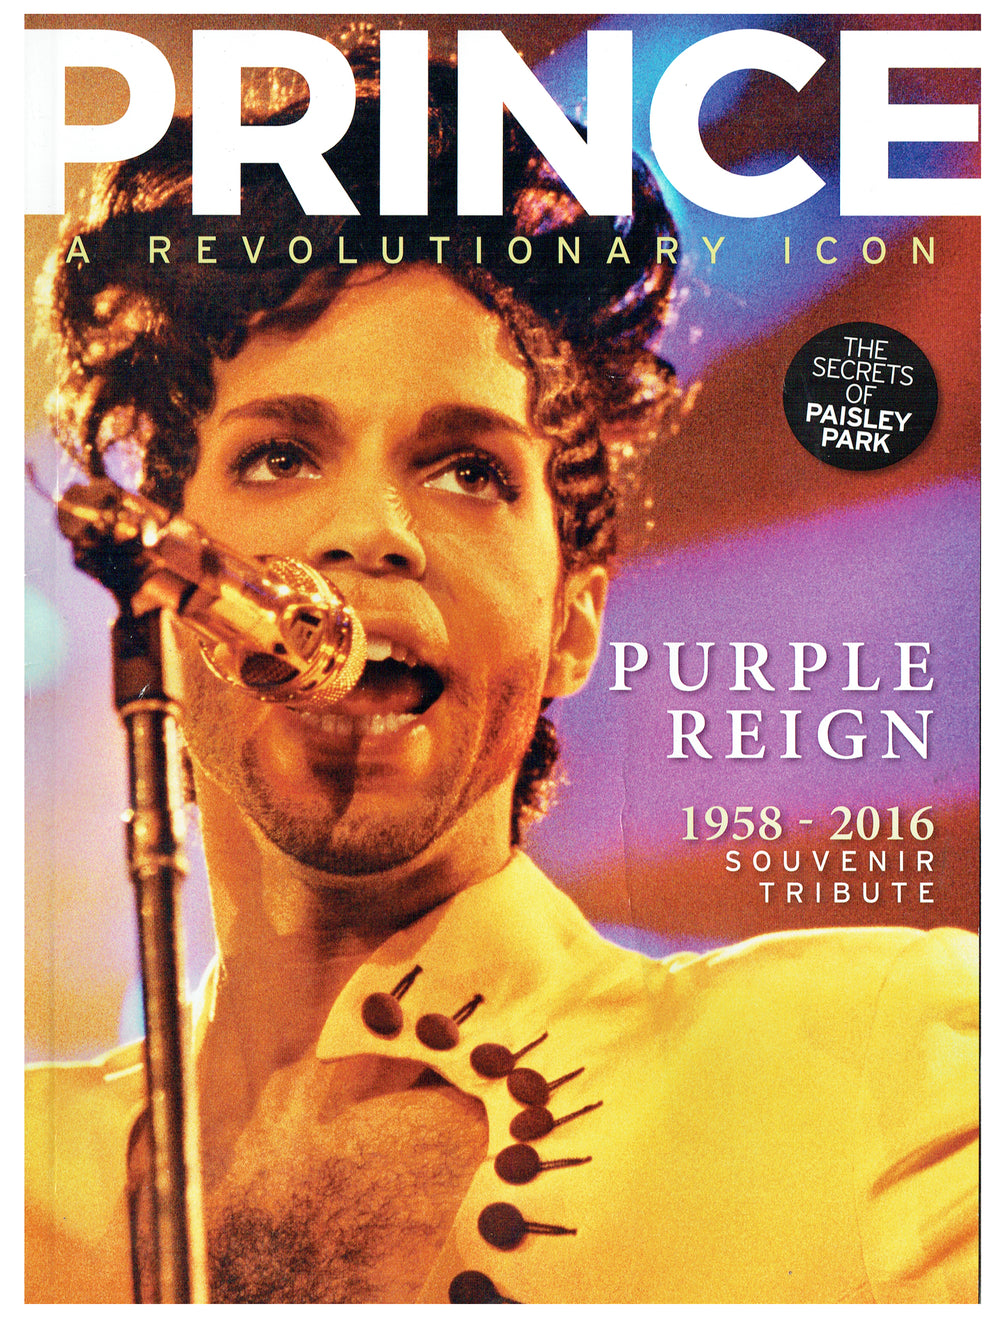 Prince – Revolutionary ICON Special Magazine 80 Pages All Prince Preloved: 2016